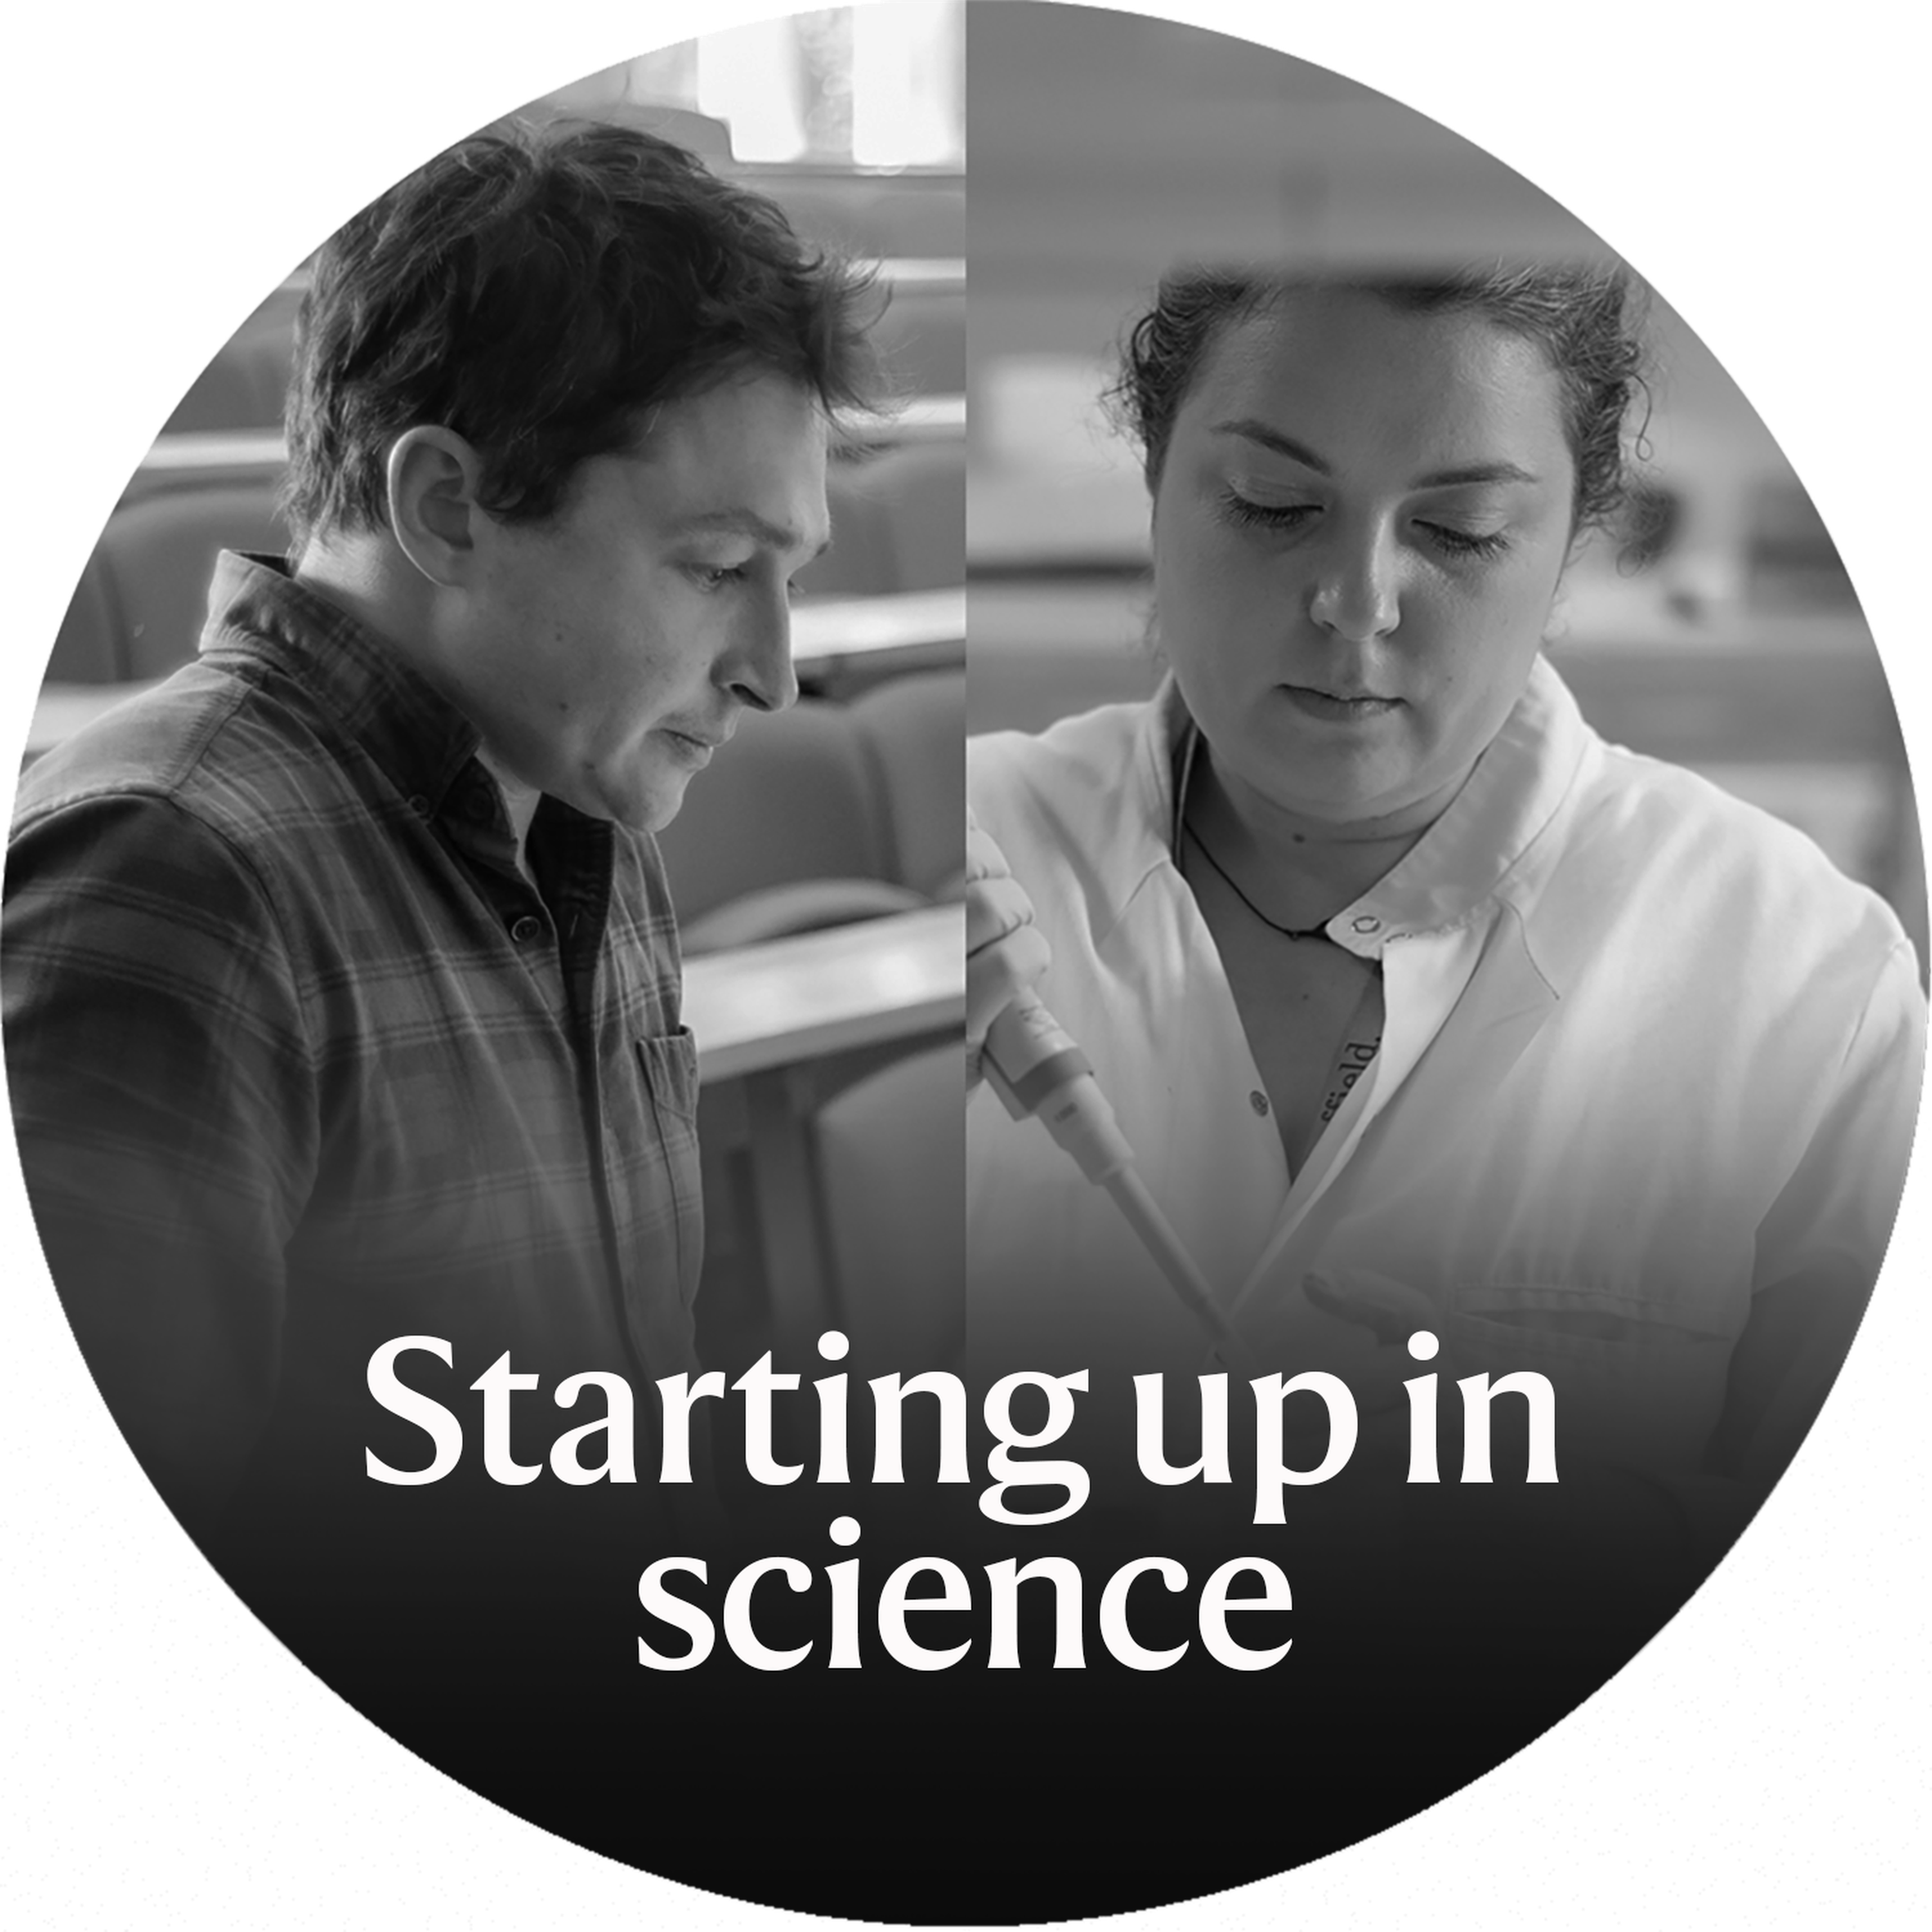 Starting up in science: Episode 4